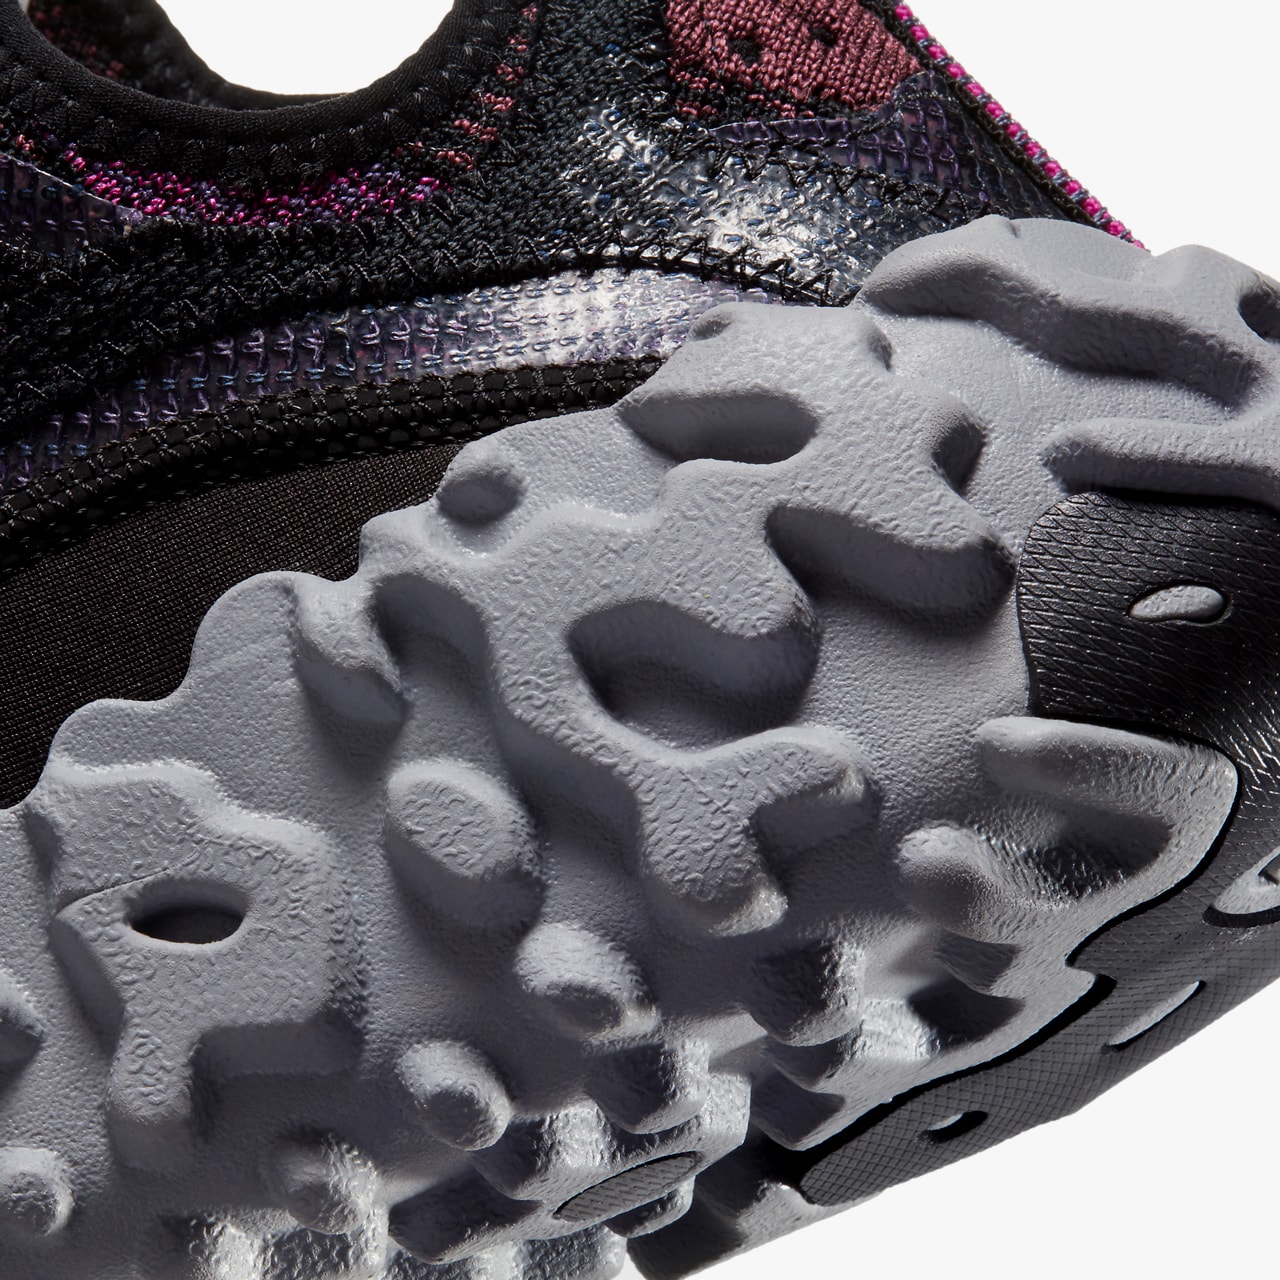 nike ispa overreact shadowberry black grey CD9664 002 official release date info photos price store list buying guide